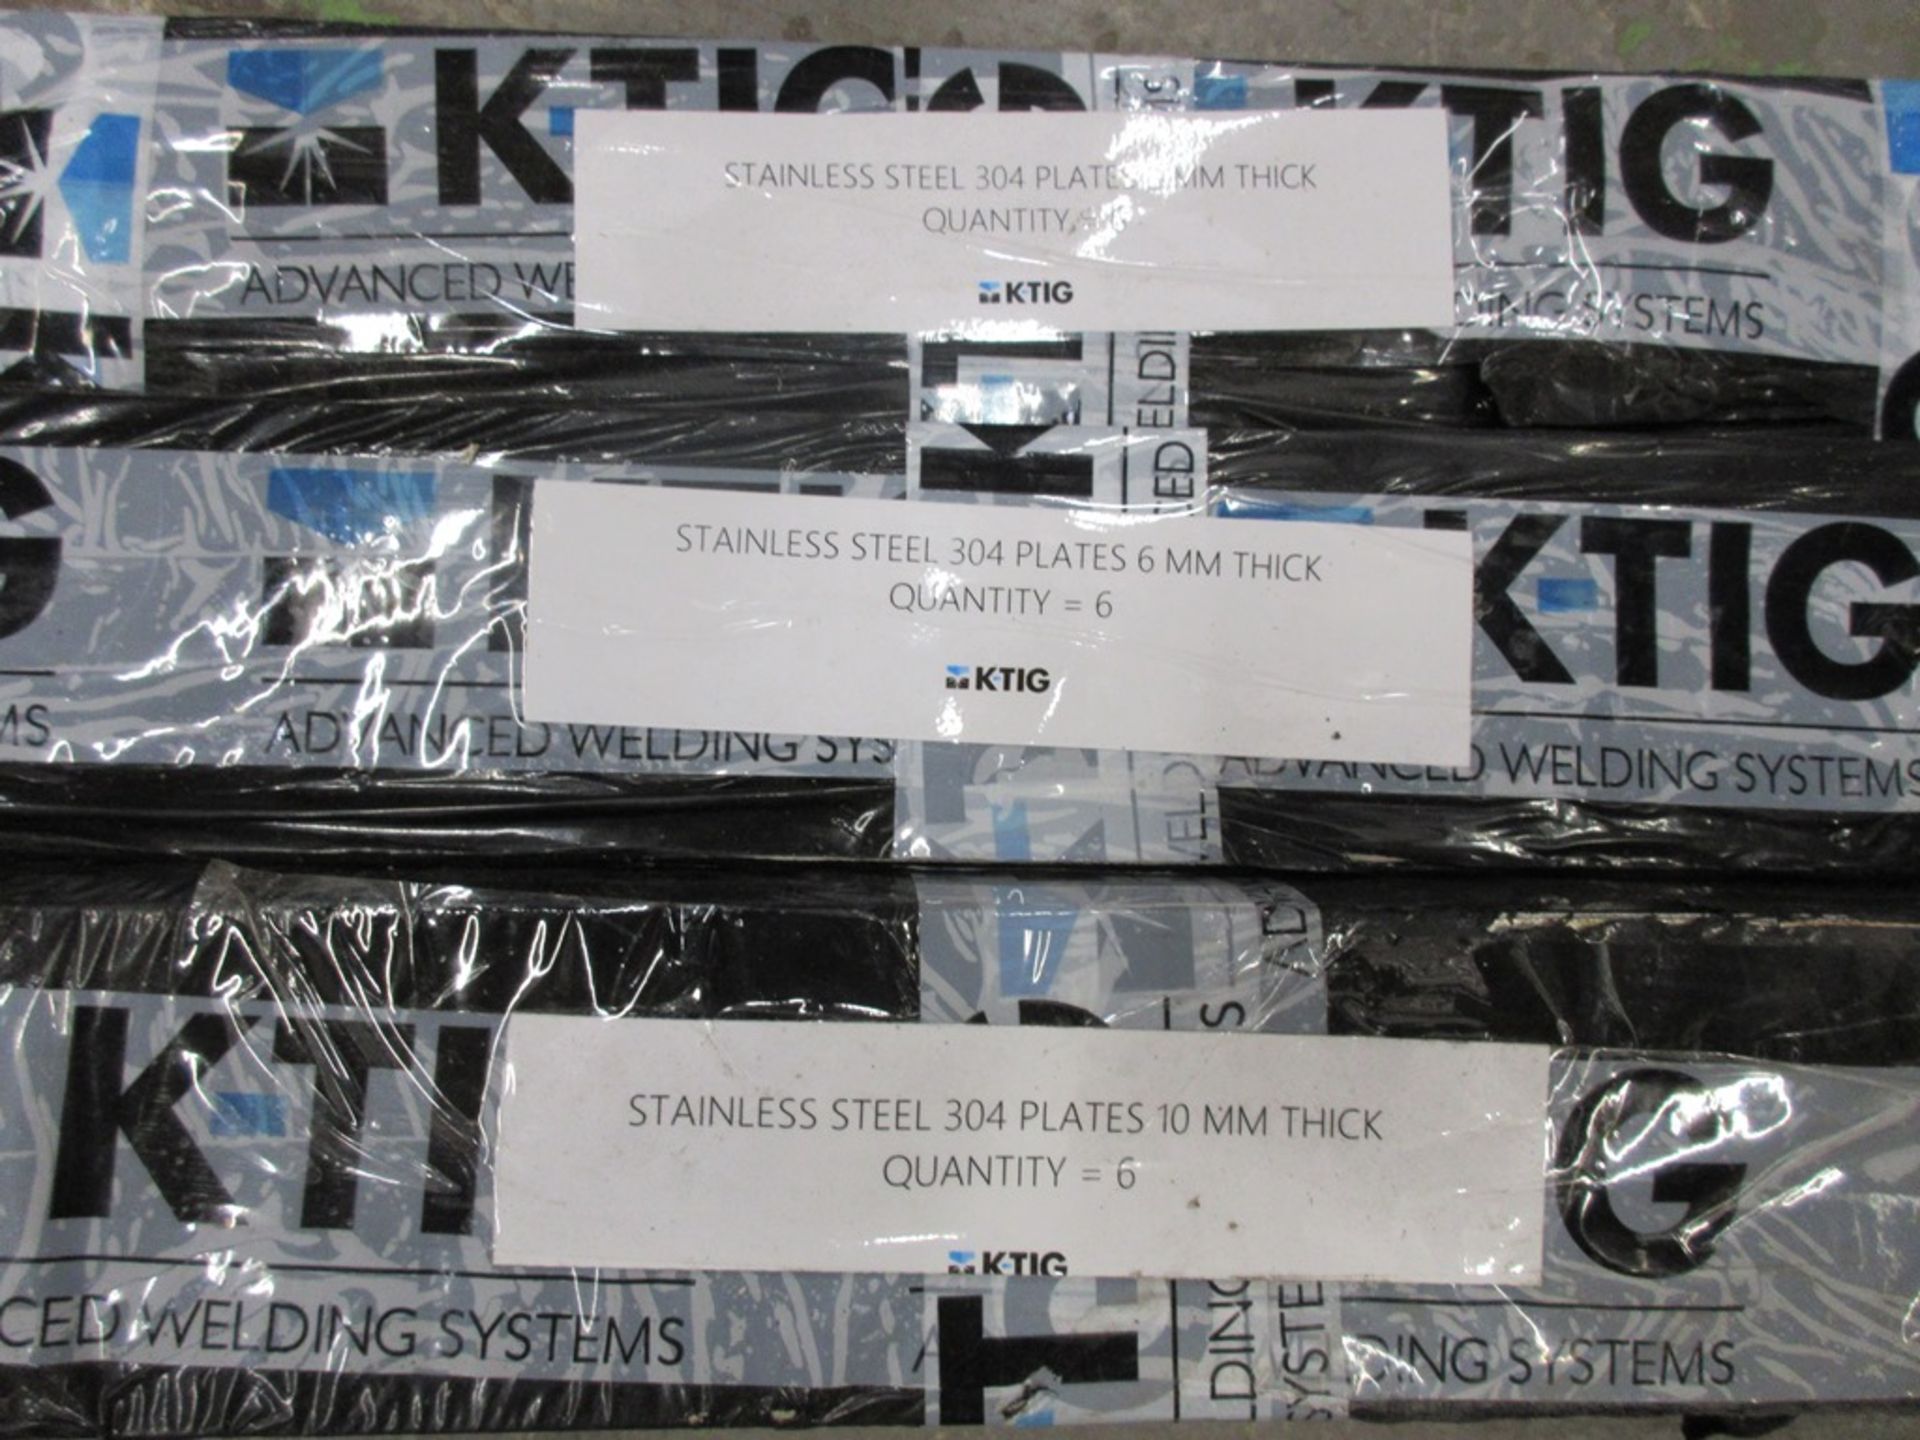 Three packs x 6 Stainless steel 304 K-TIG plates including 6mm, 10mm and K-TIG stainless steel 304 - Image 2 of 4